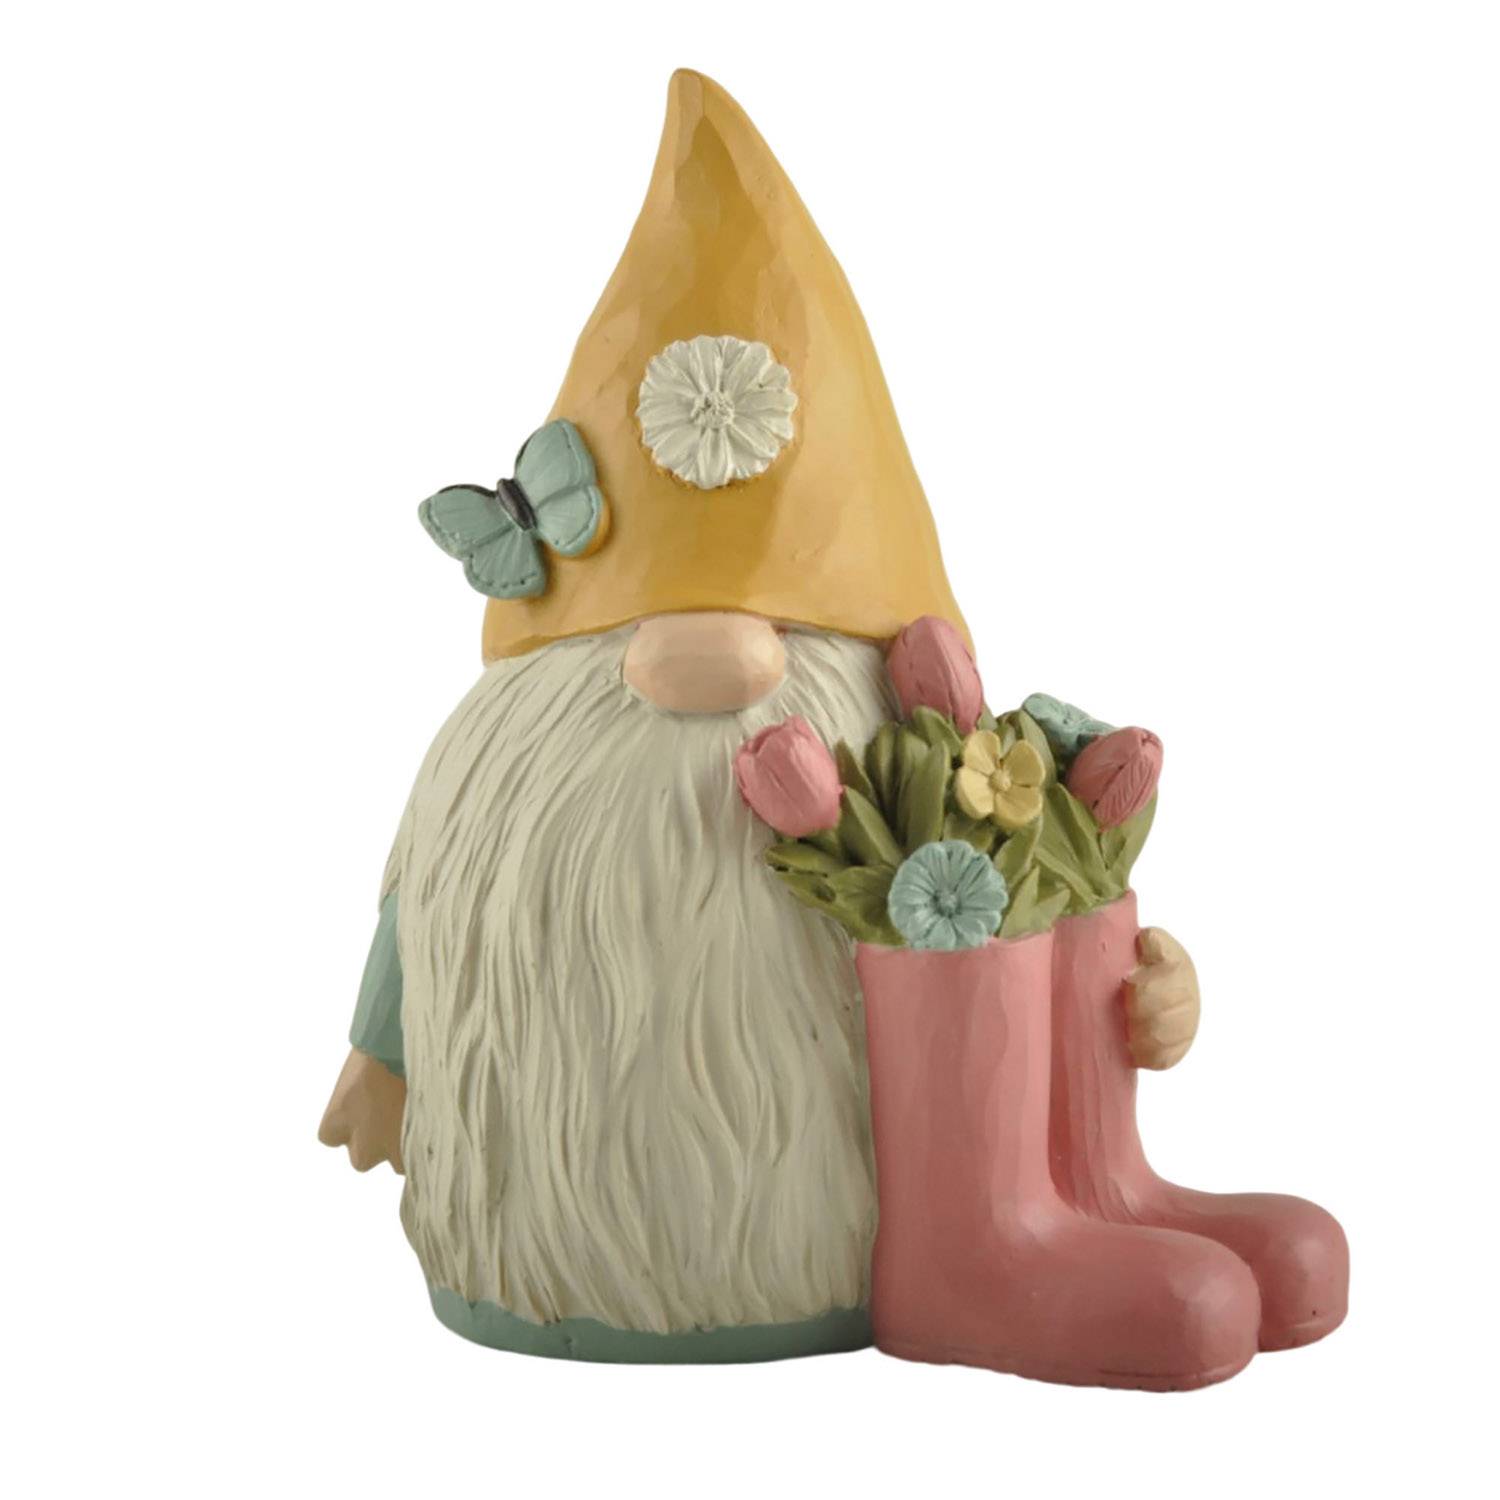 Hot Sale New Design Garden Gnome With Orange Hat & Pink Boots Spring Gifts231-13678